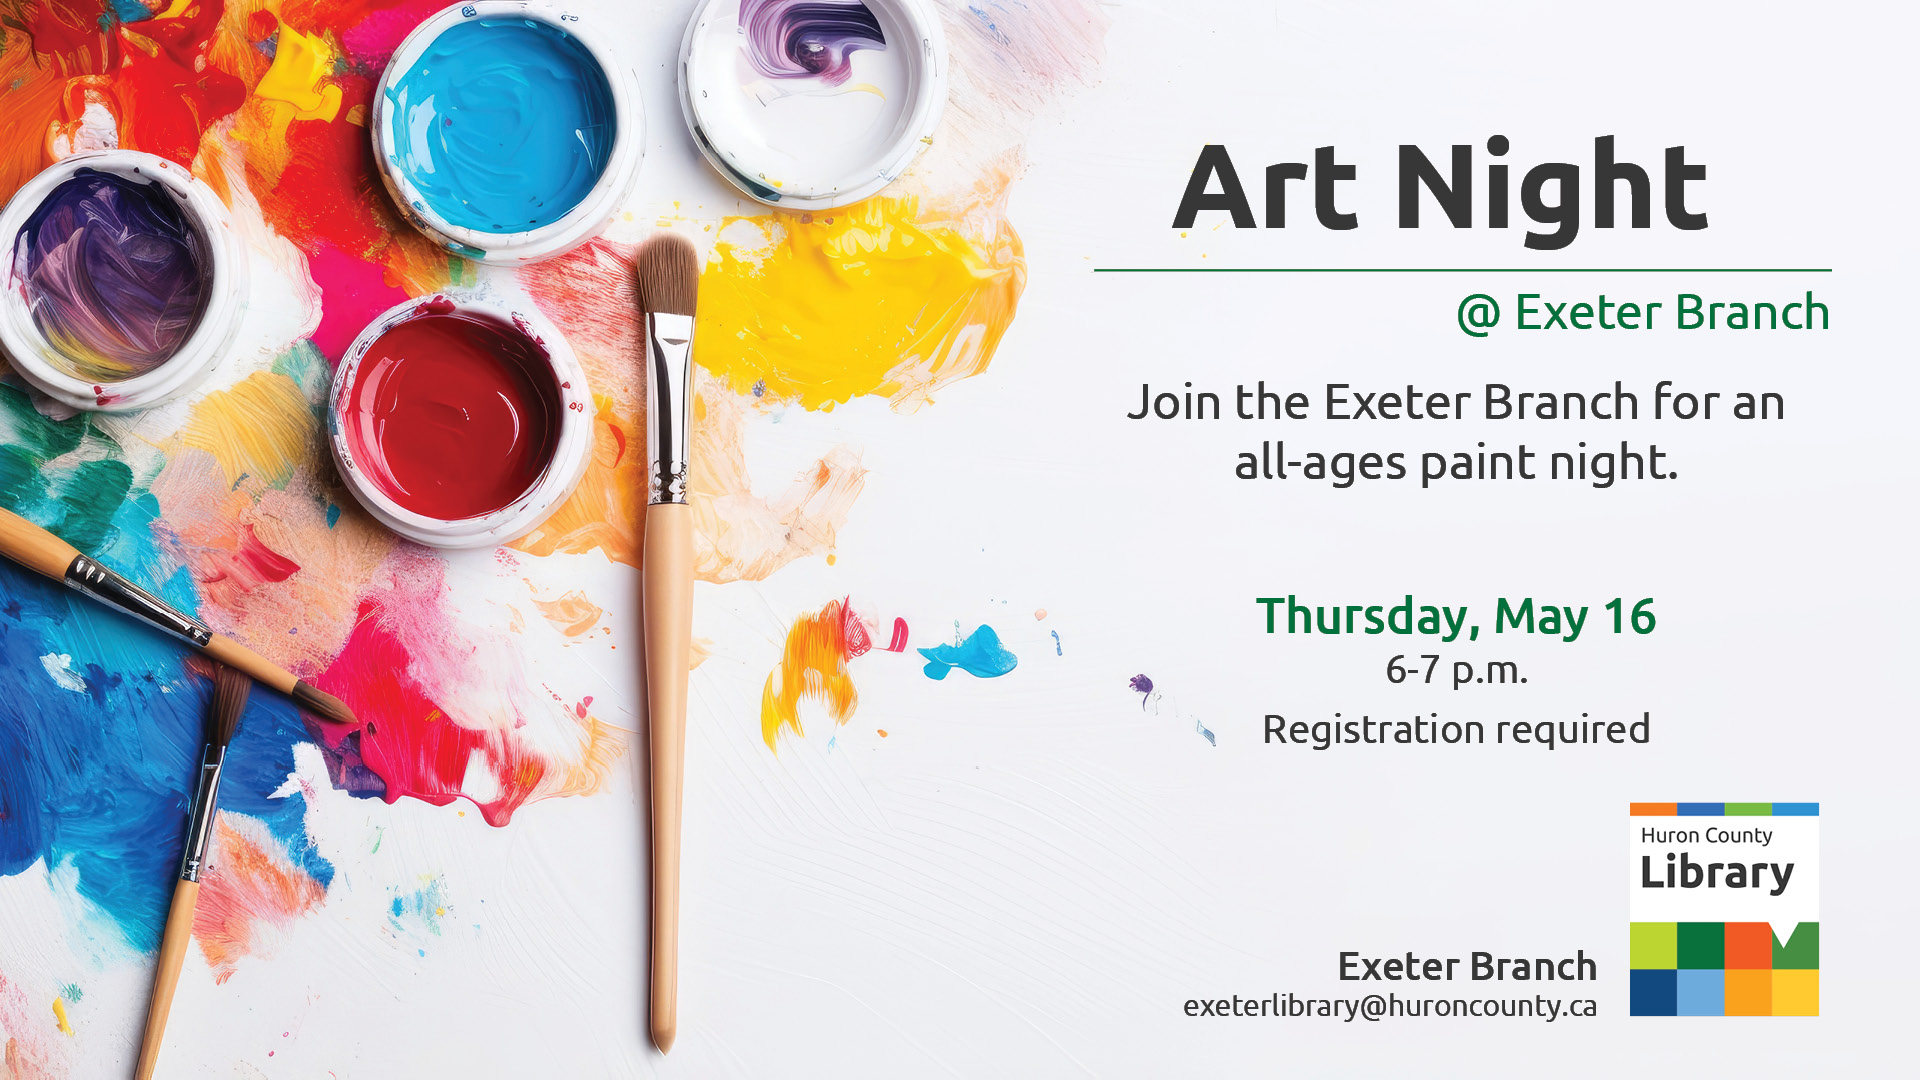 Image of paints and paint brushes with text promoting Art Night at Exeter